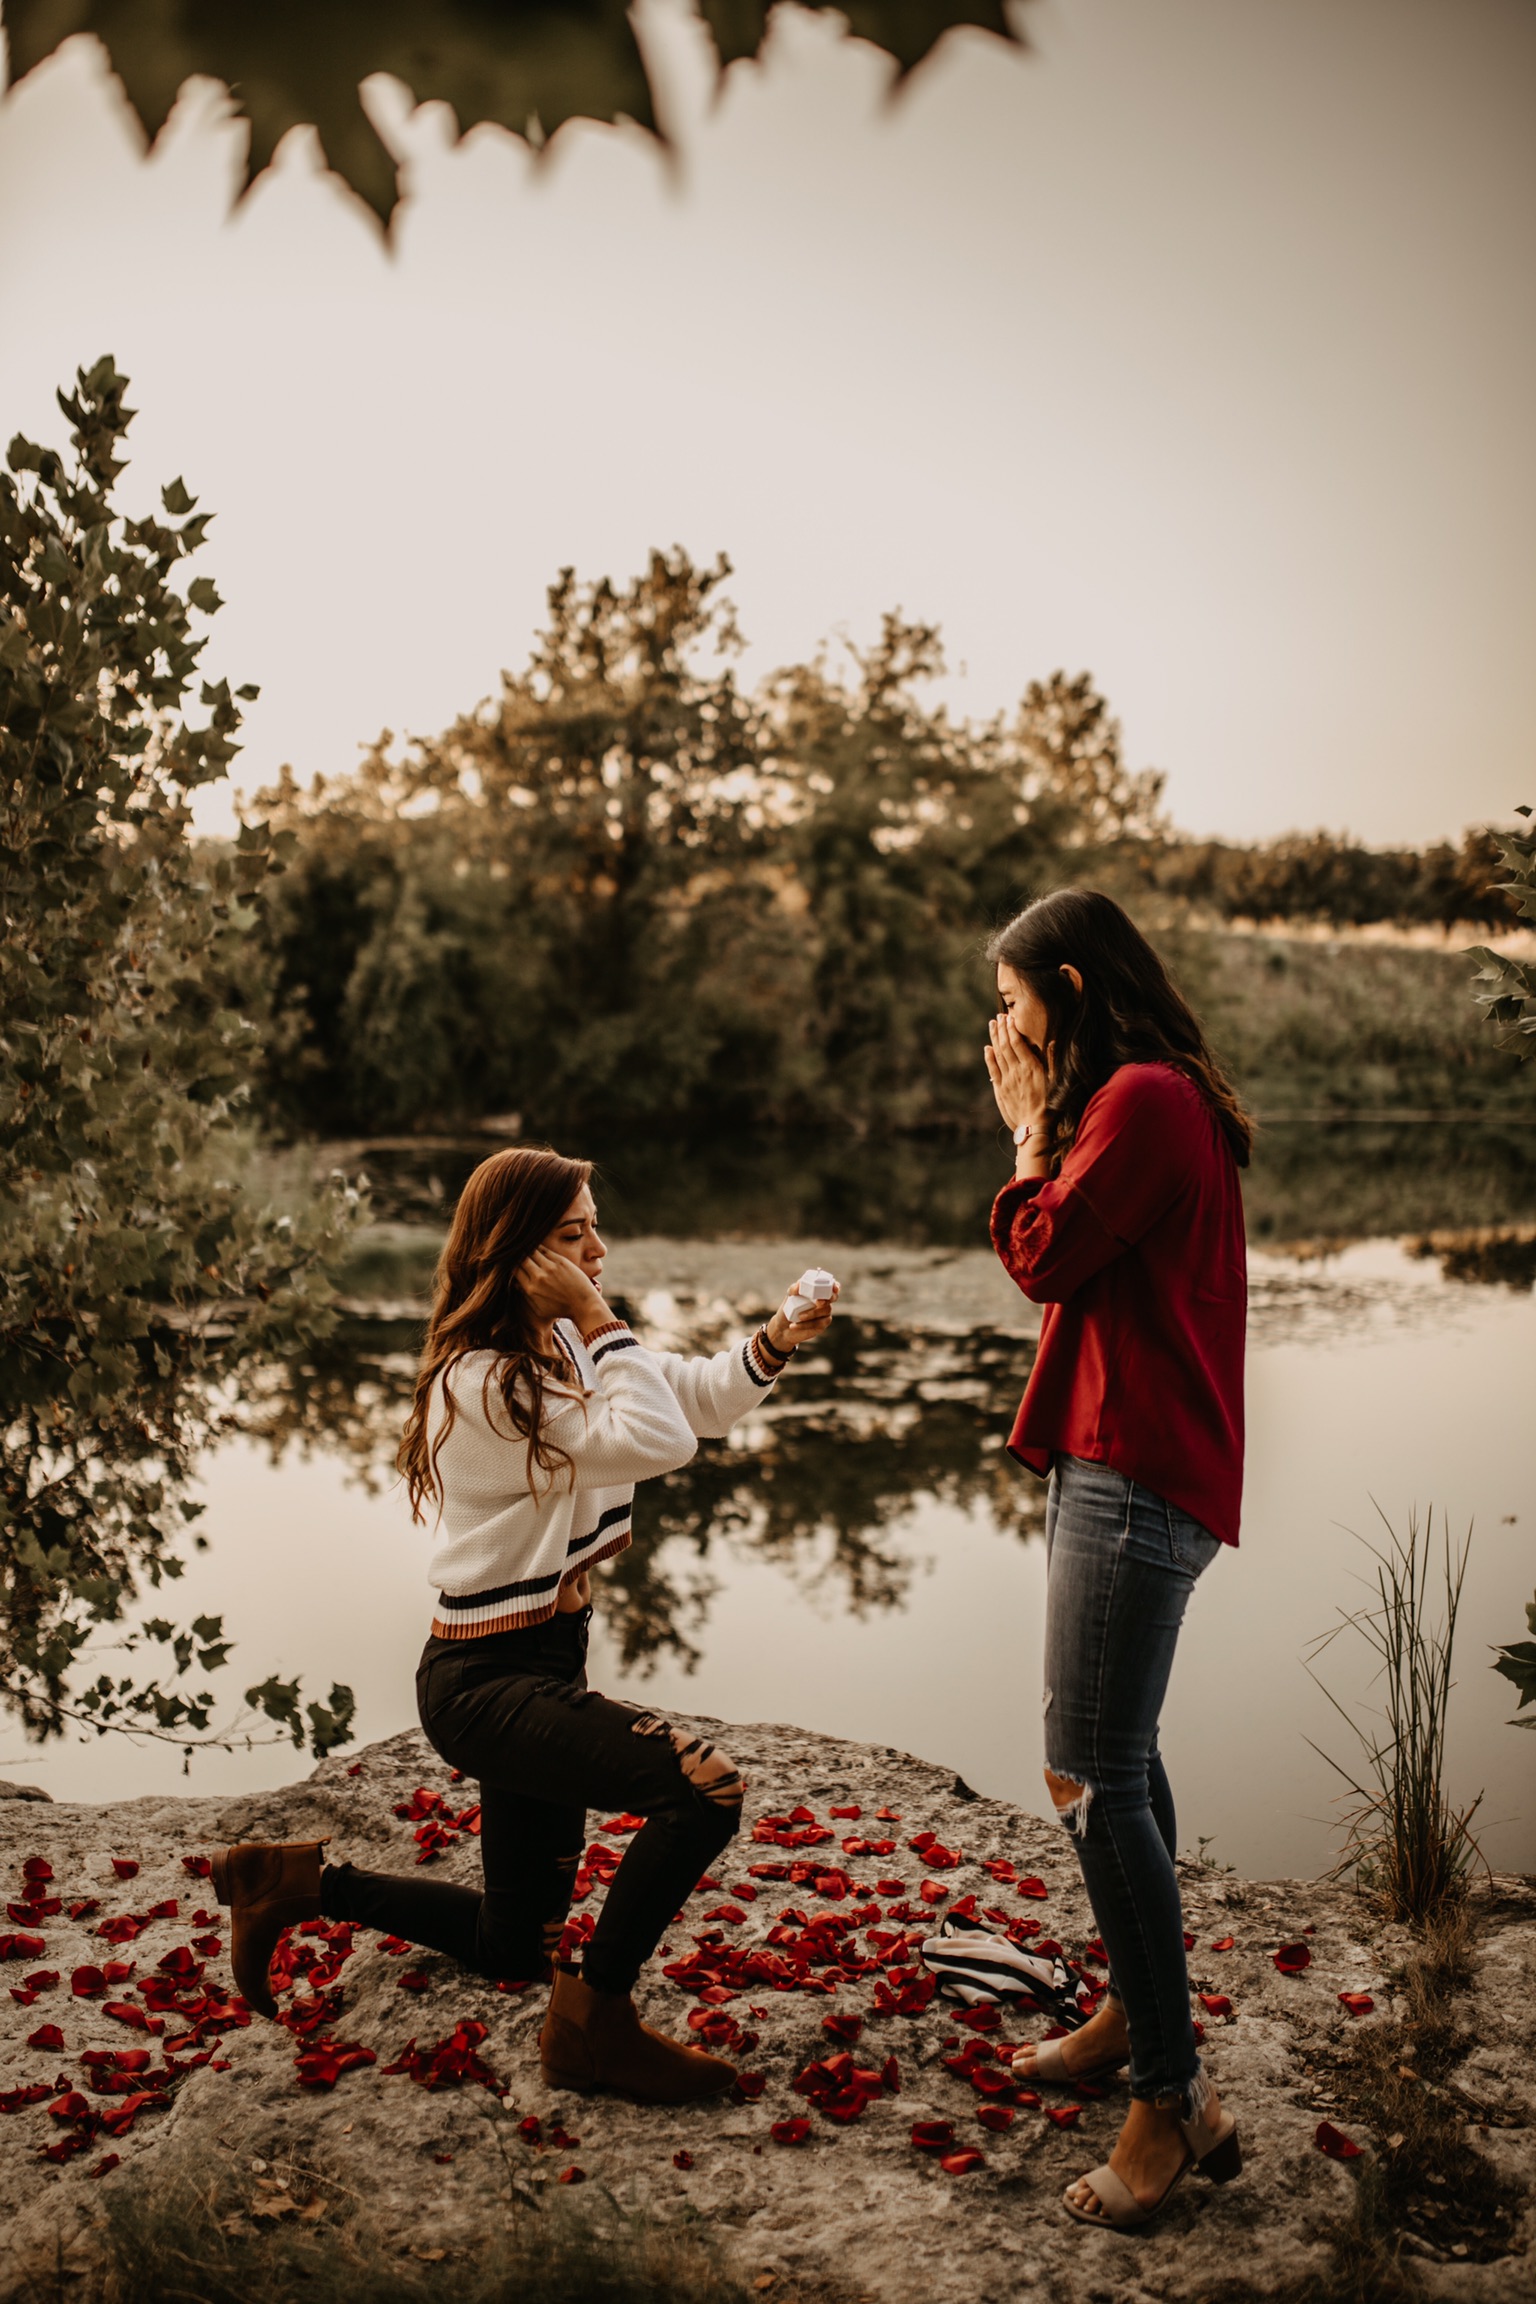 Fall photos turned surprise proposal in San Antonio, Texas moody romantic two brides rose petals outdoors water lake